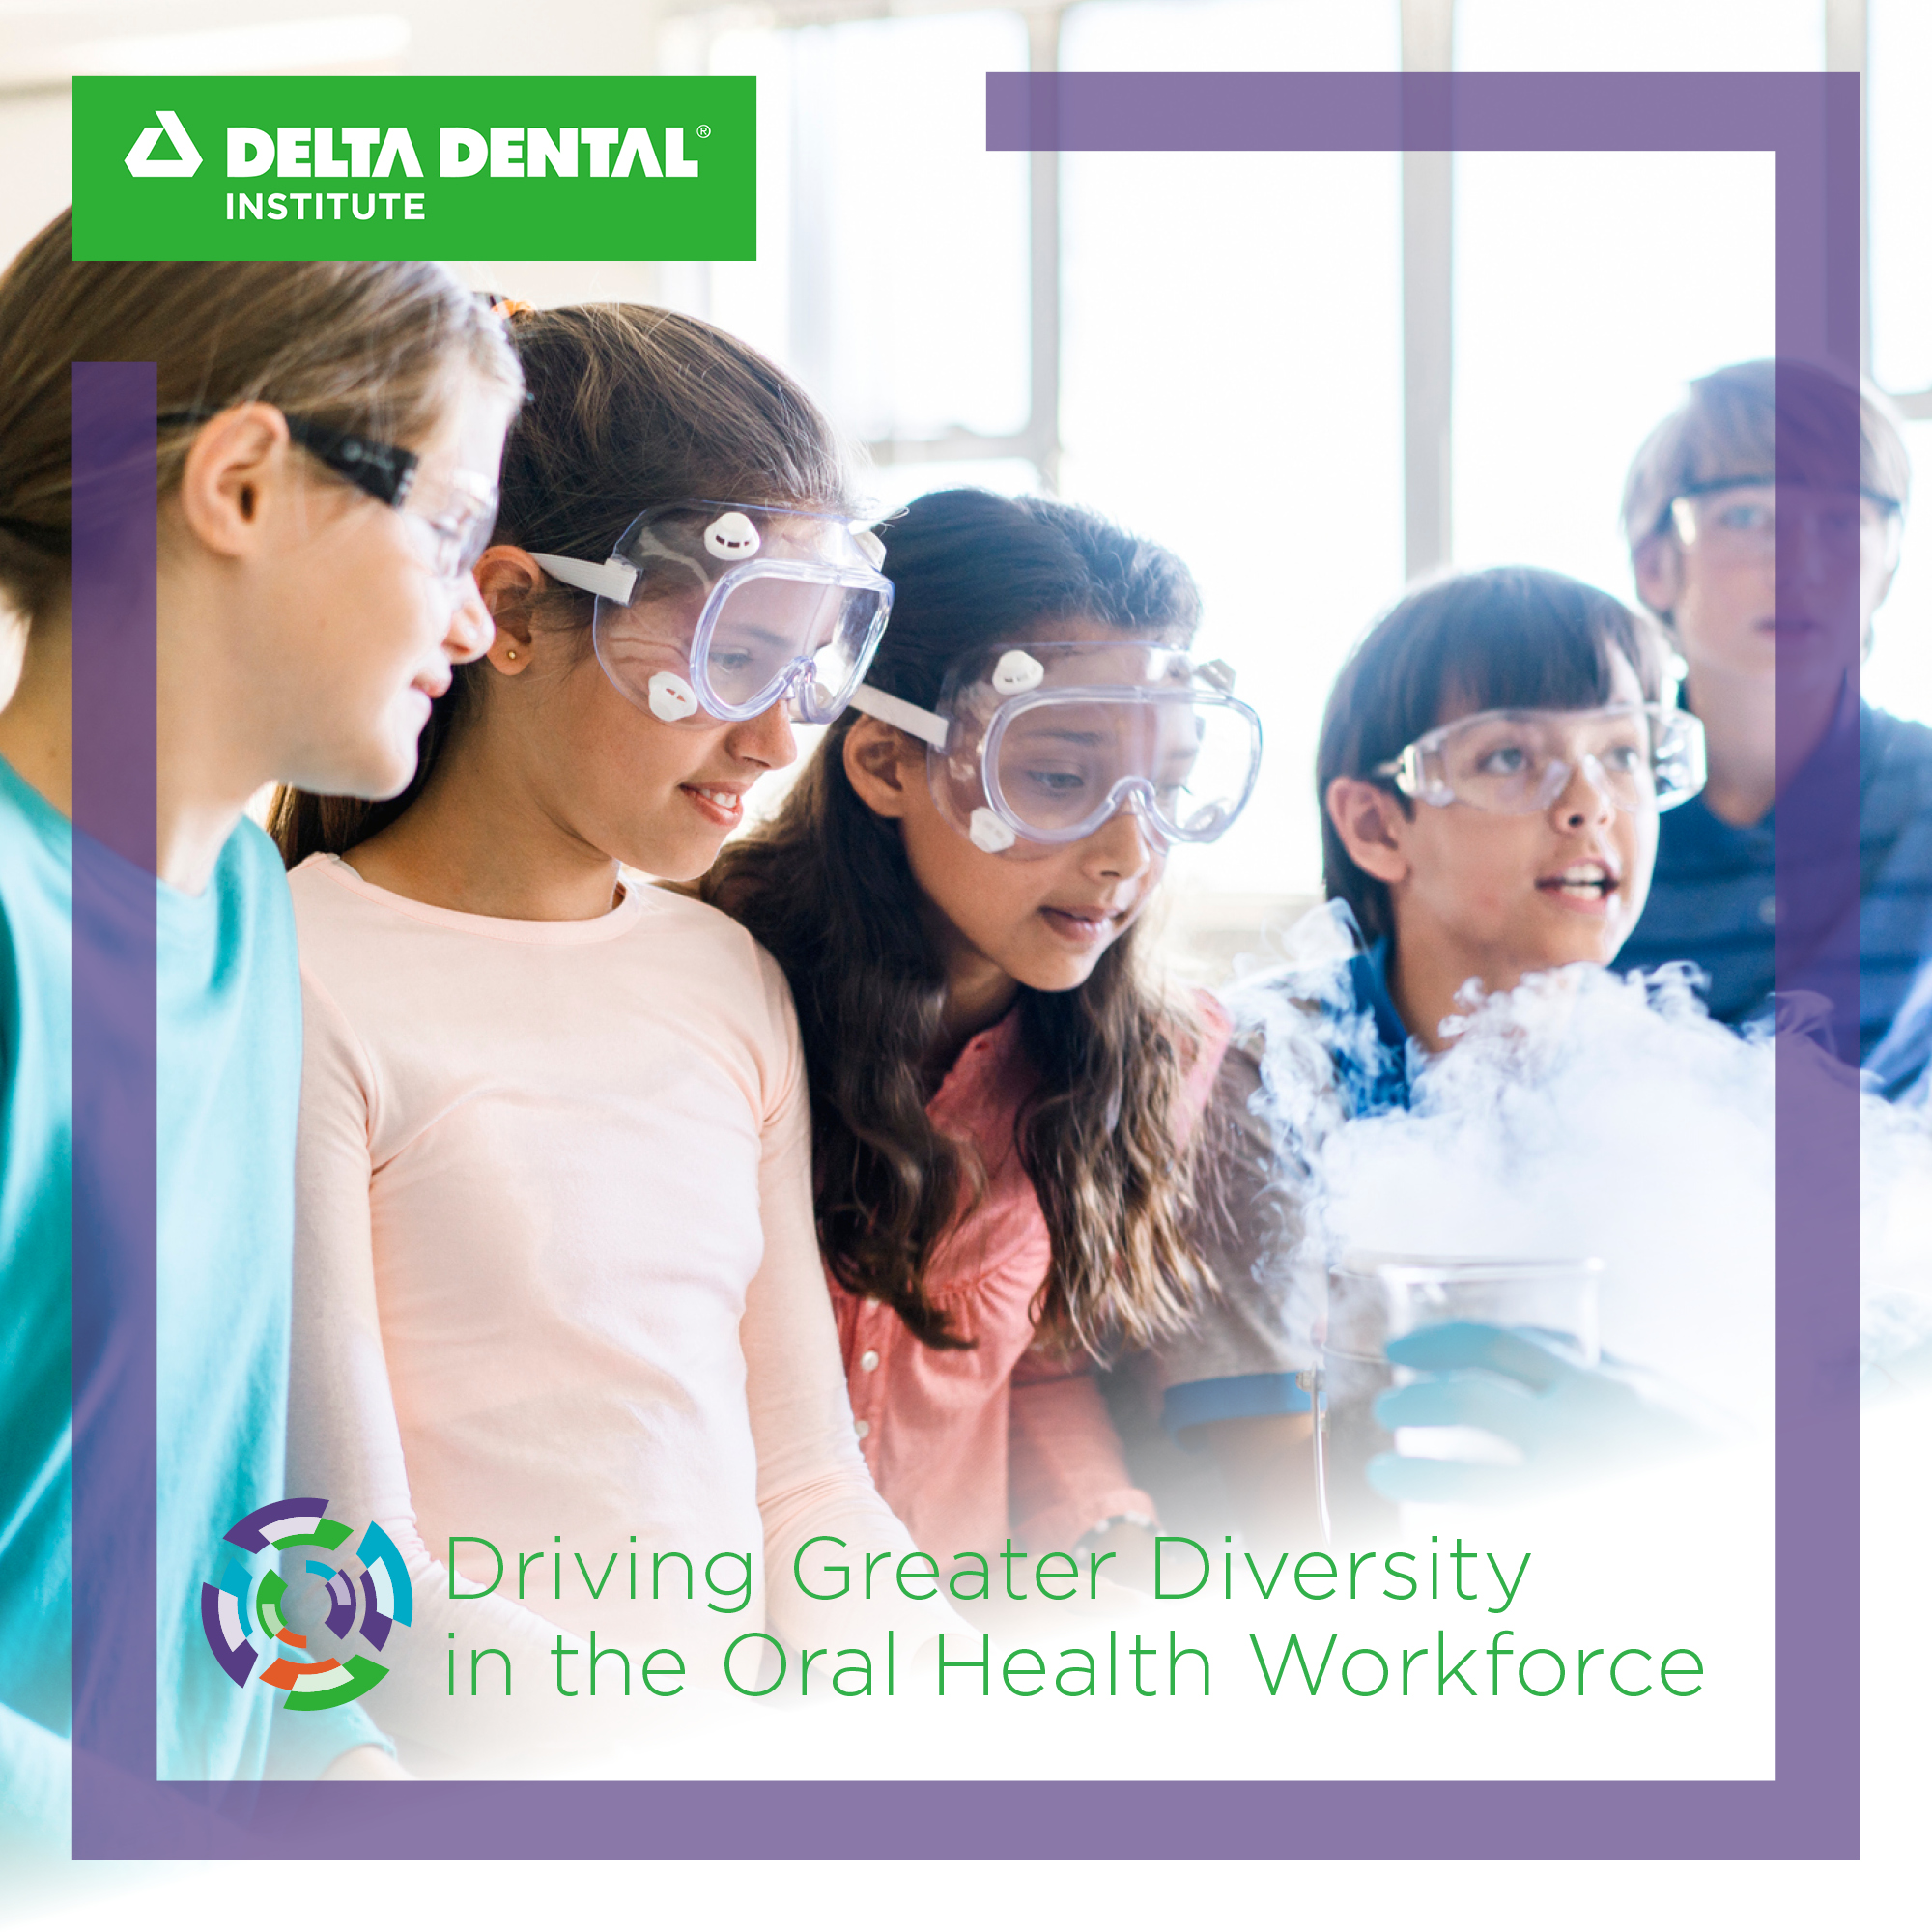 Delta Dental has launched the Driving Greater Diversity in the Oral Health Workforce Campaign